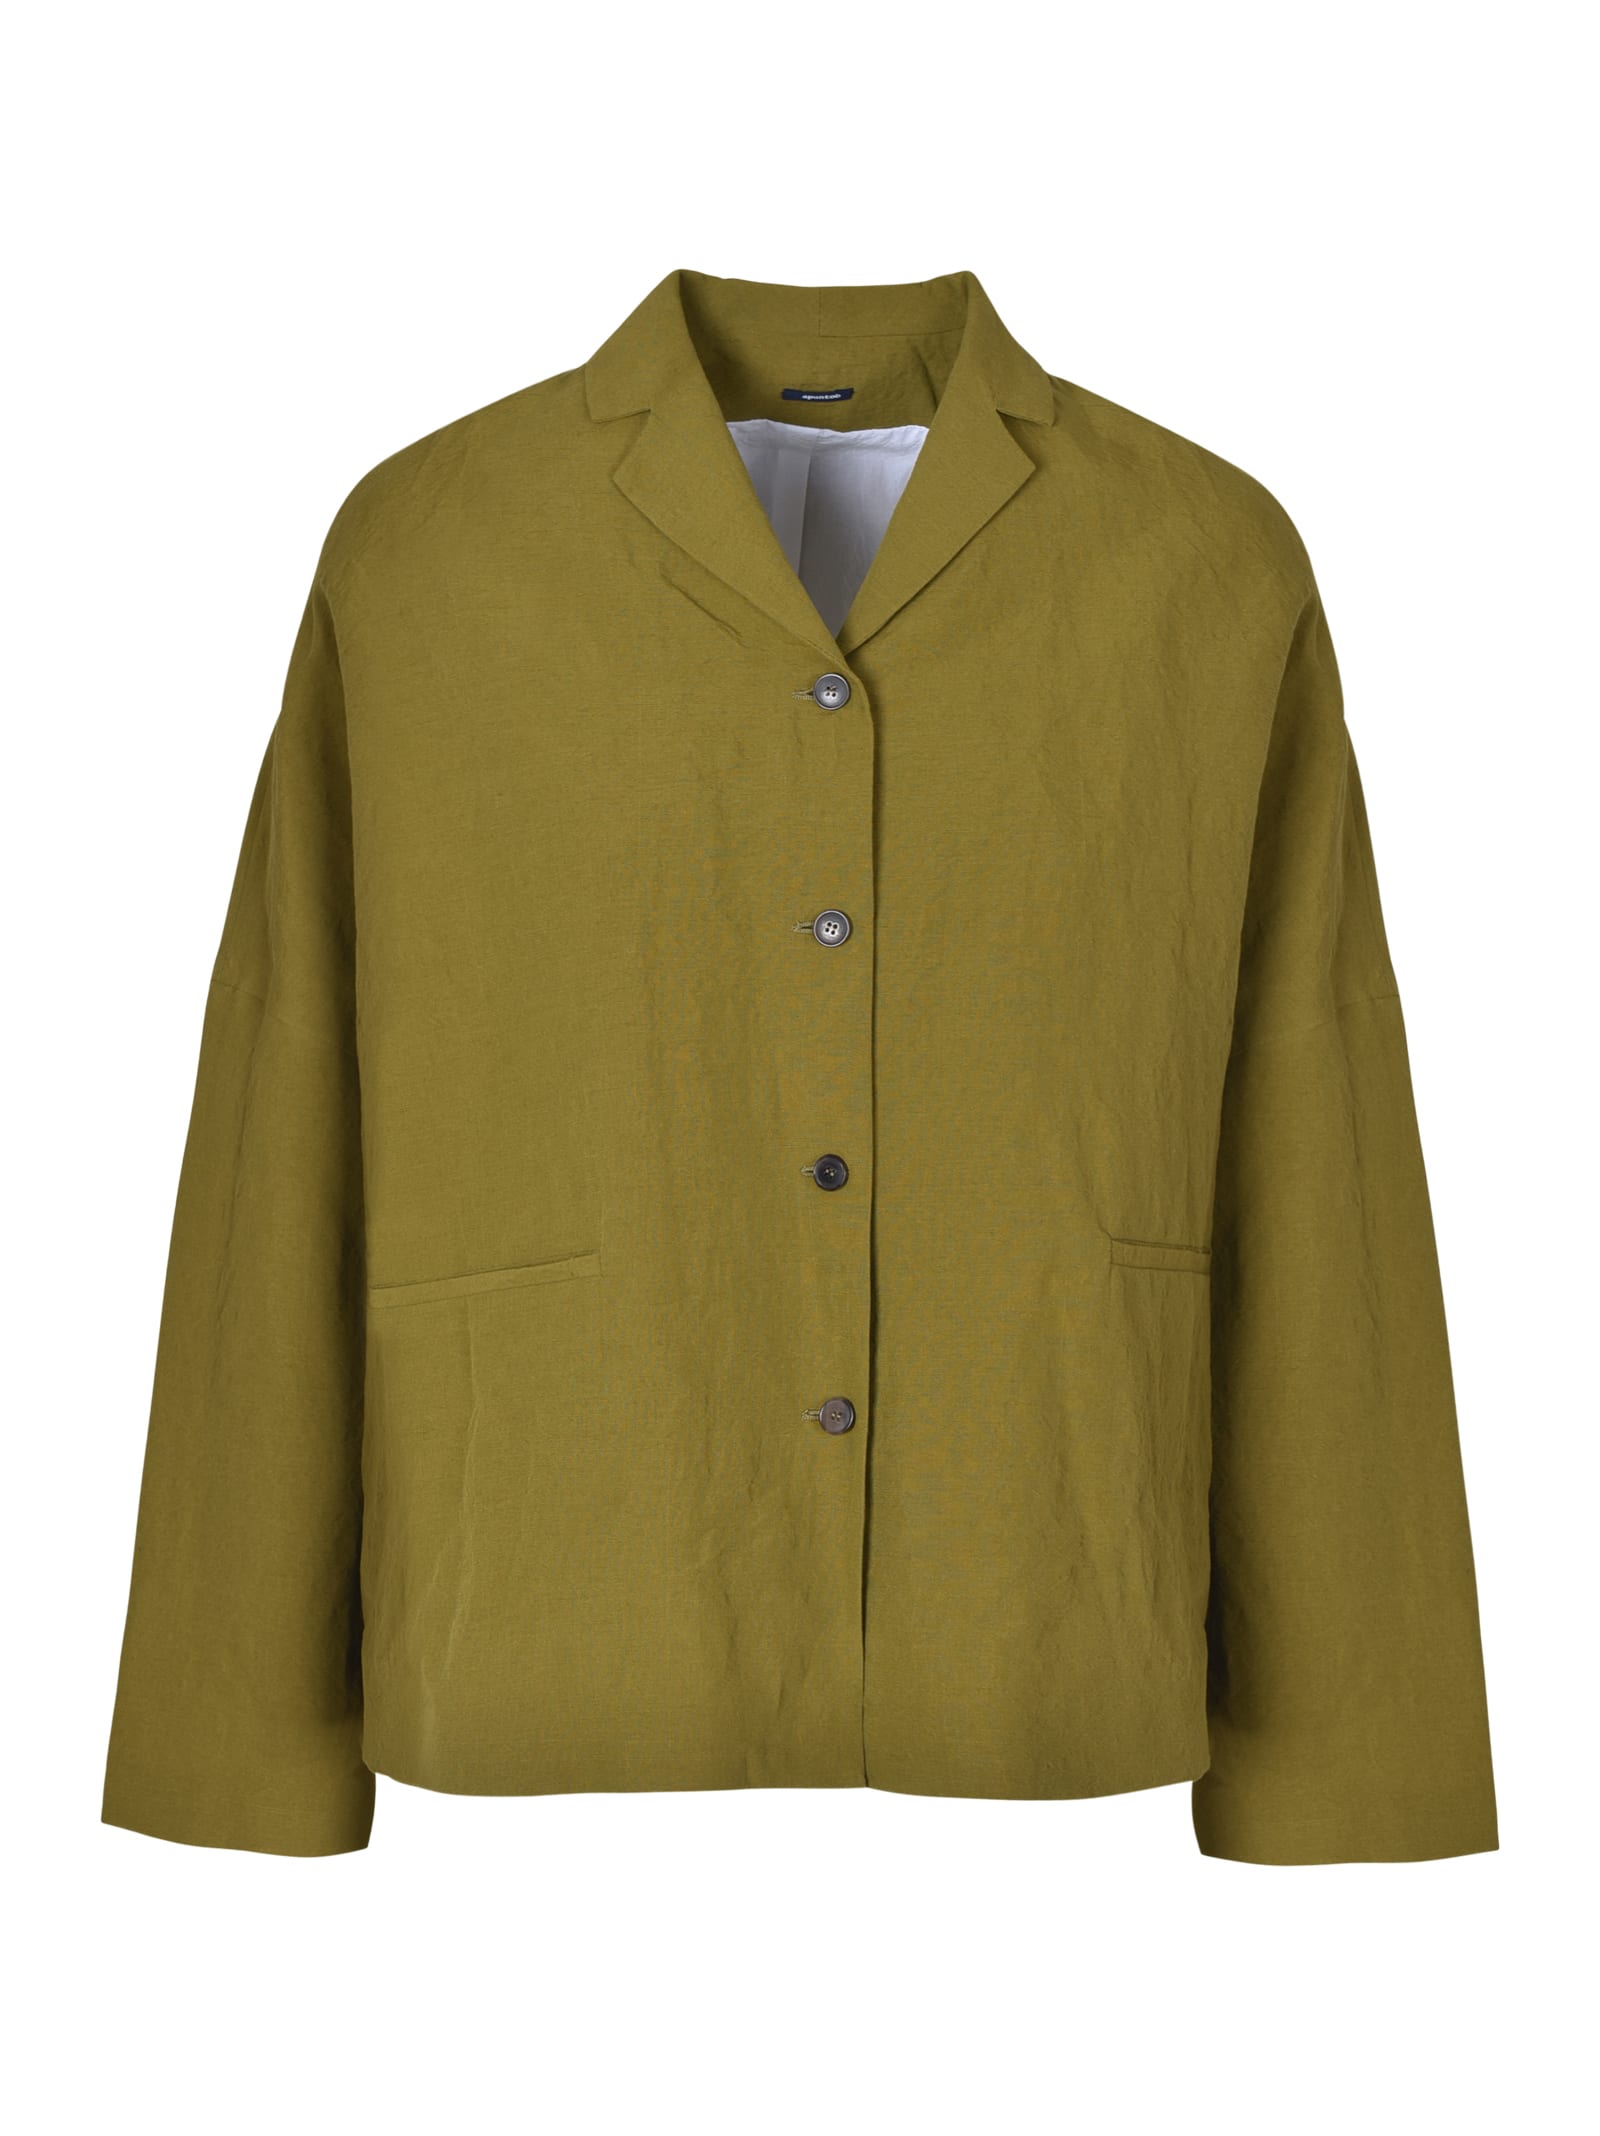 A Punto B Oversized Buttoned Jacket In Prato